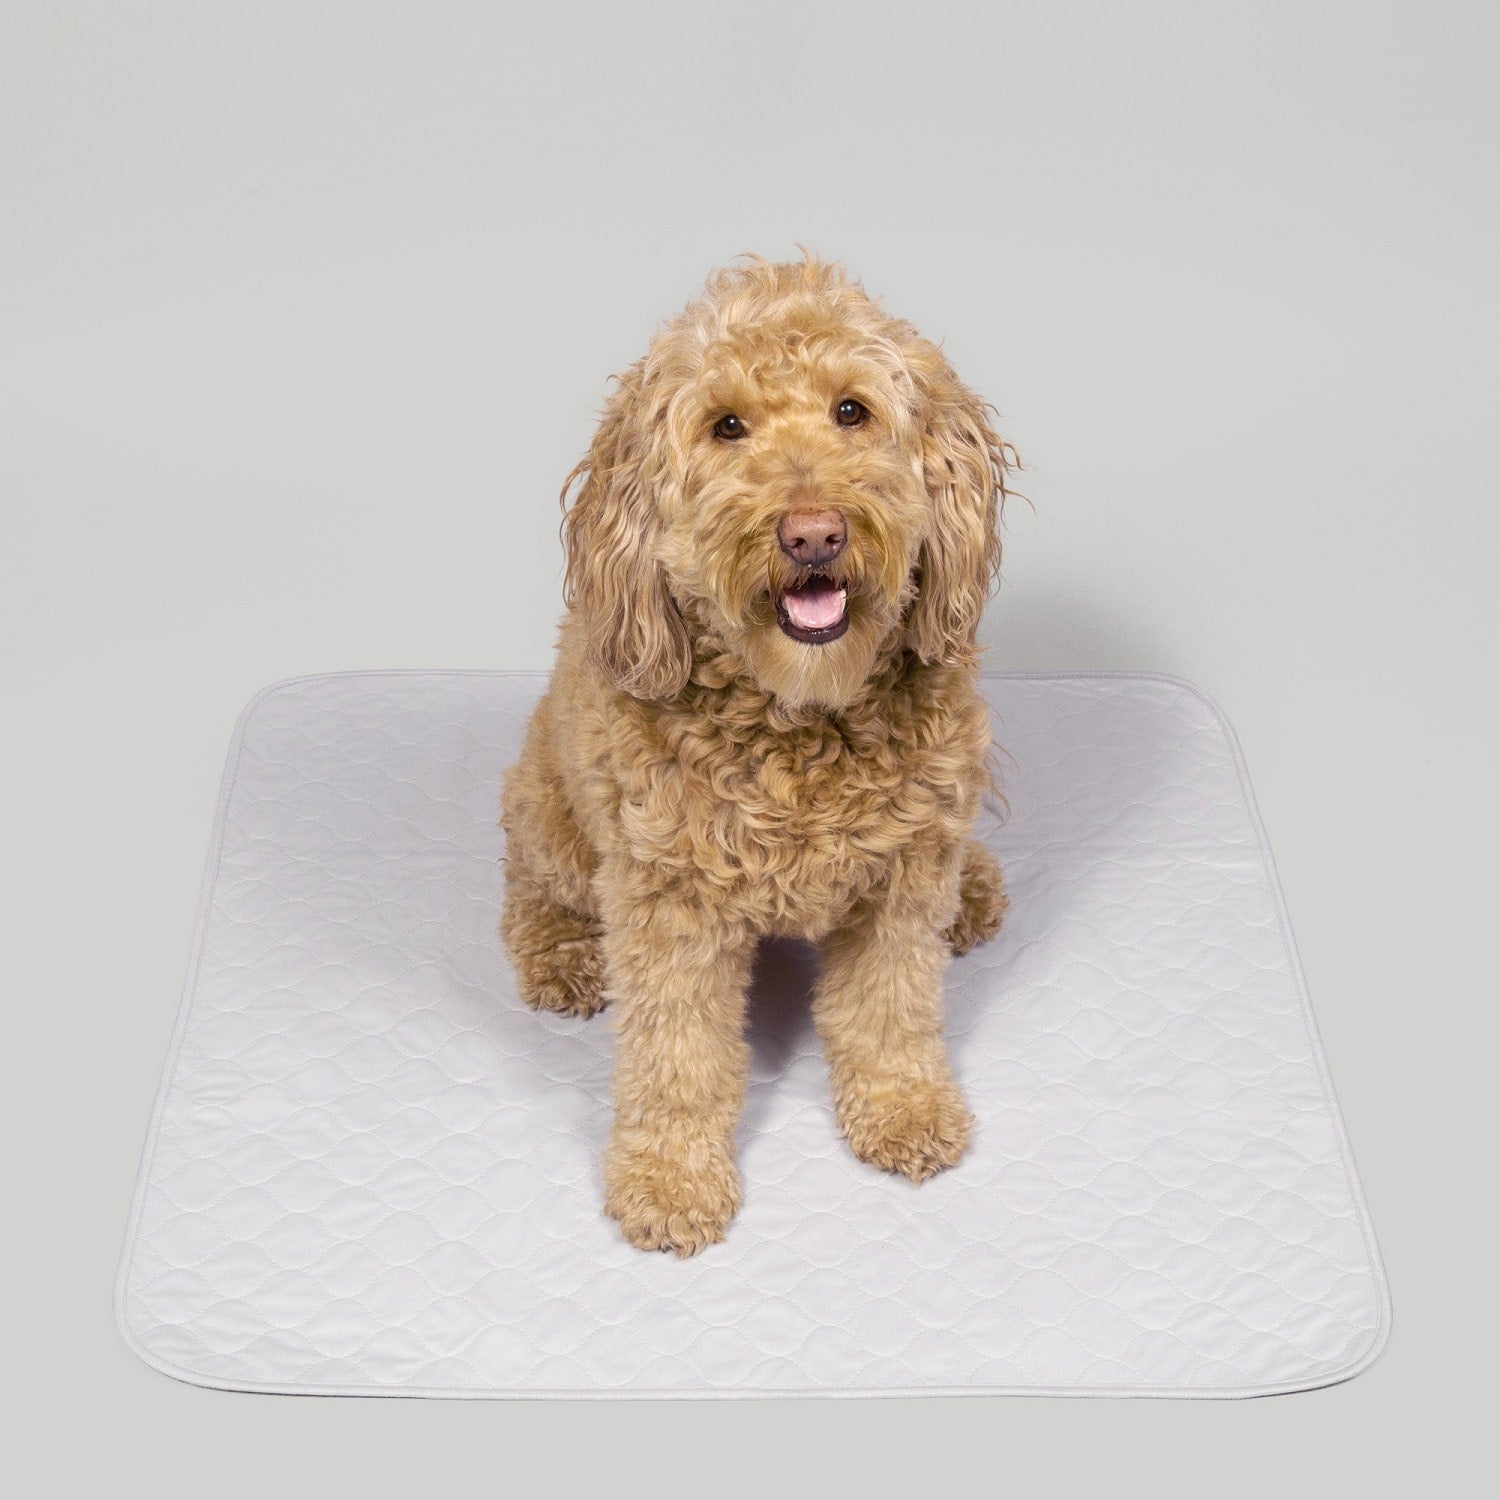 Waterproof Dog Food Mat Washable Dog Pee Pads Non-slip Absorbent Dog Bowl  Mat Large Washable Puppy Pee Pads for Dogs Doggy Cats Reusable 